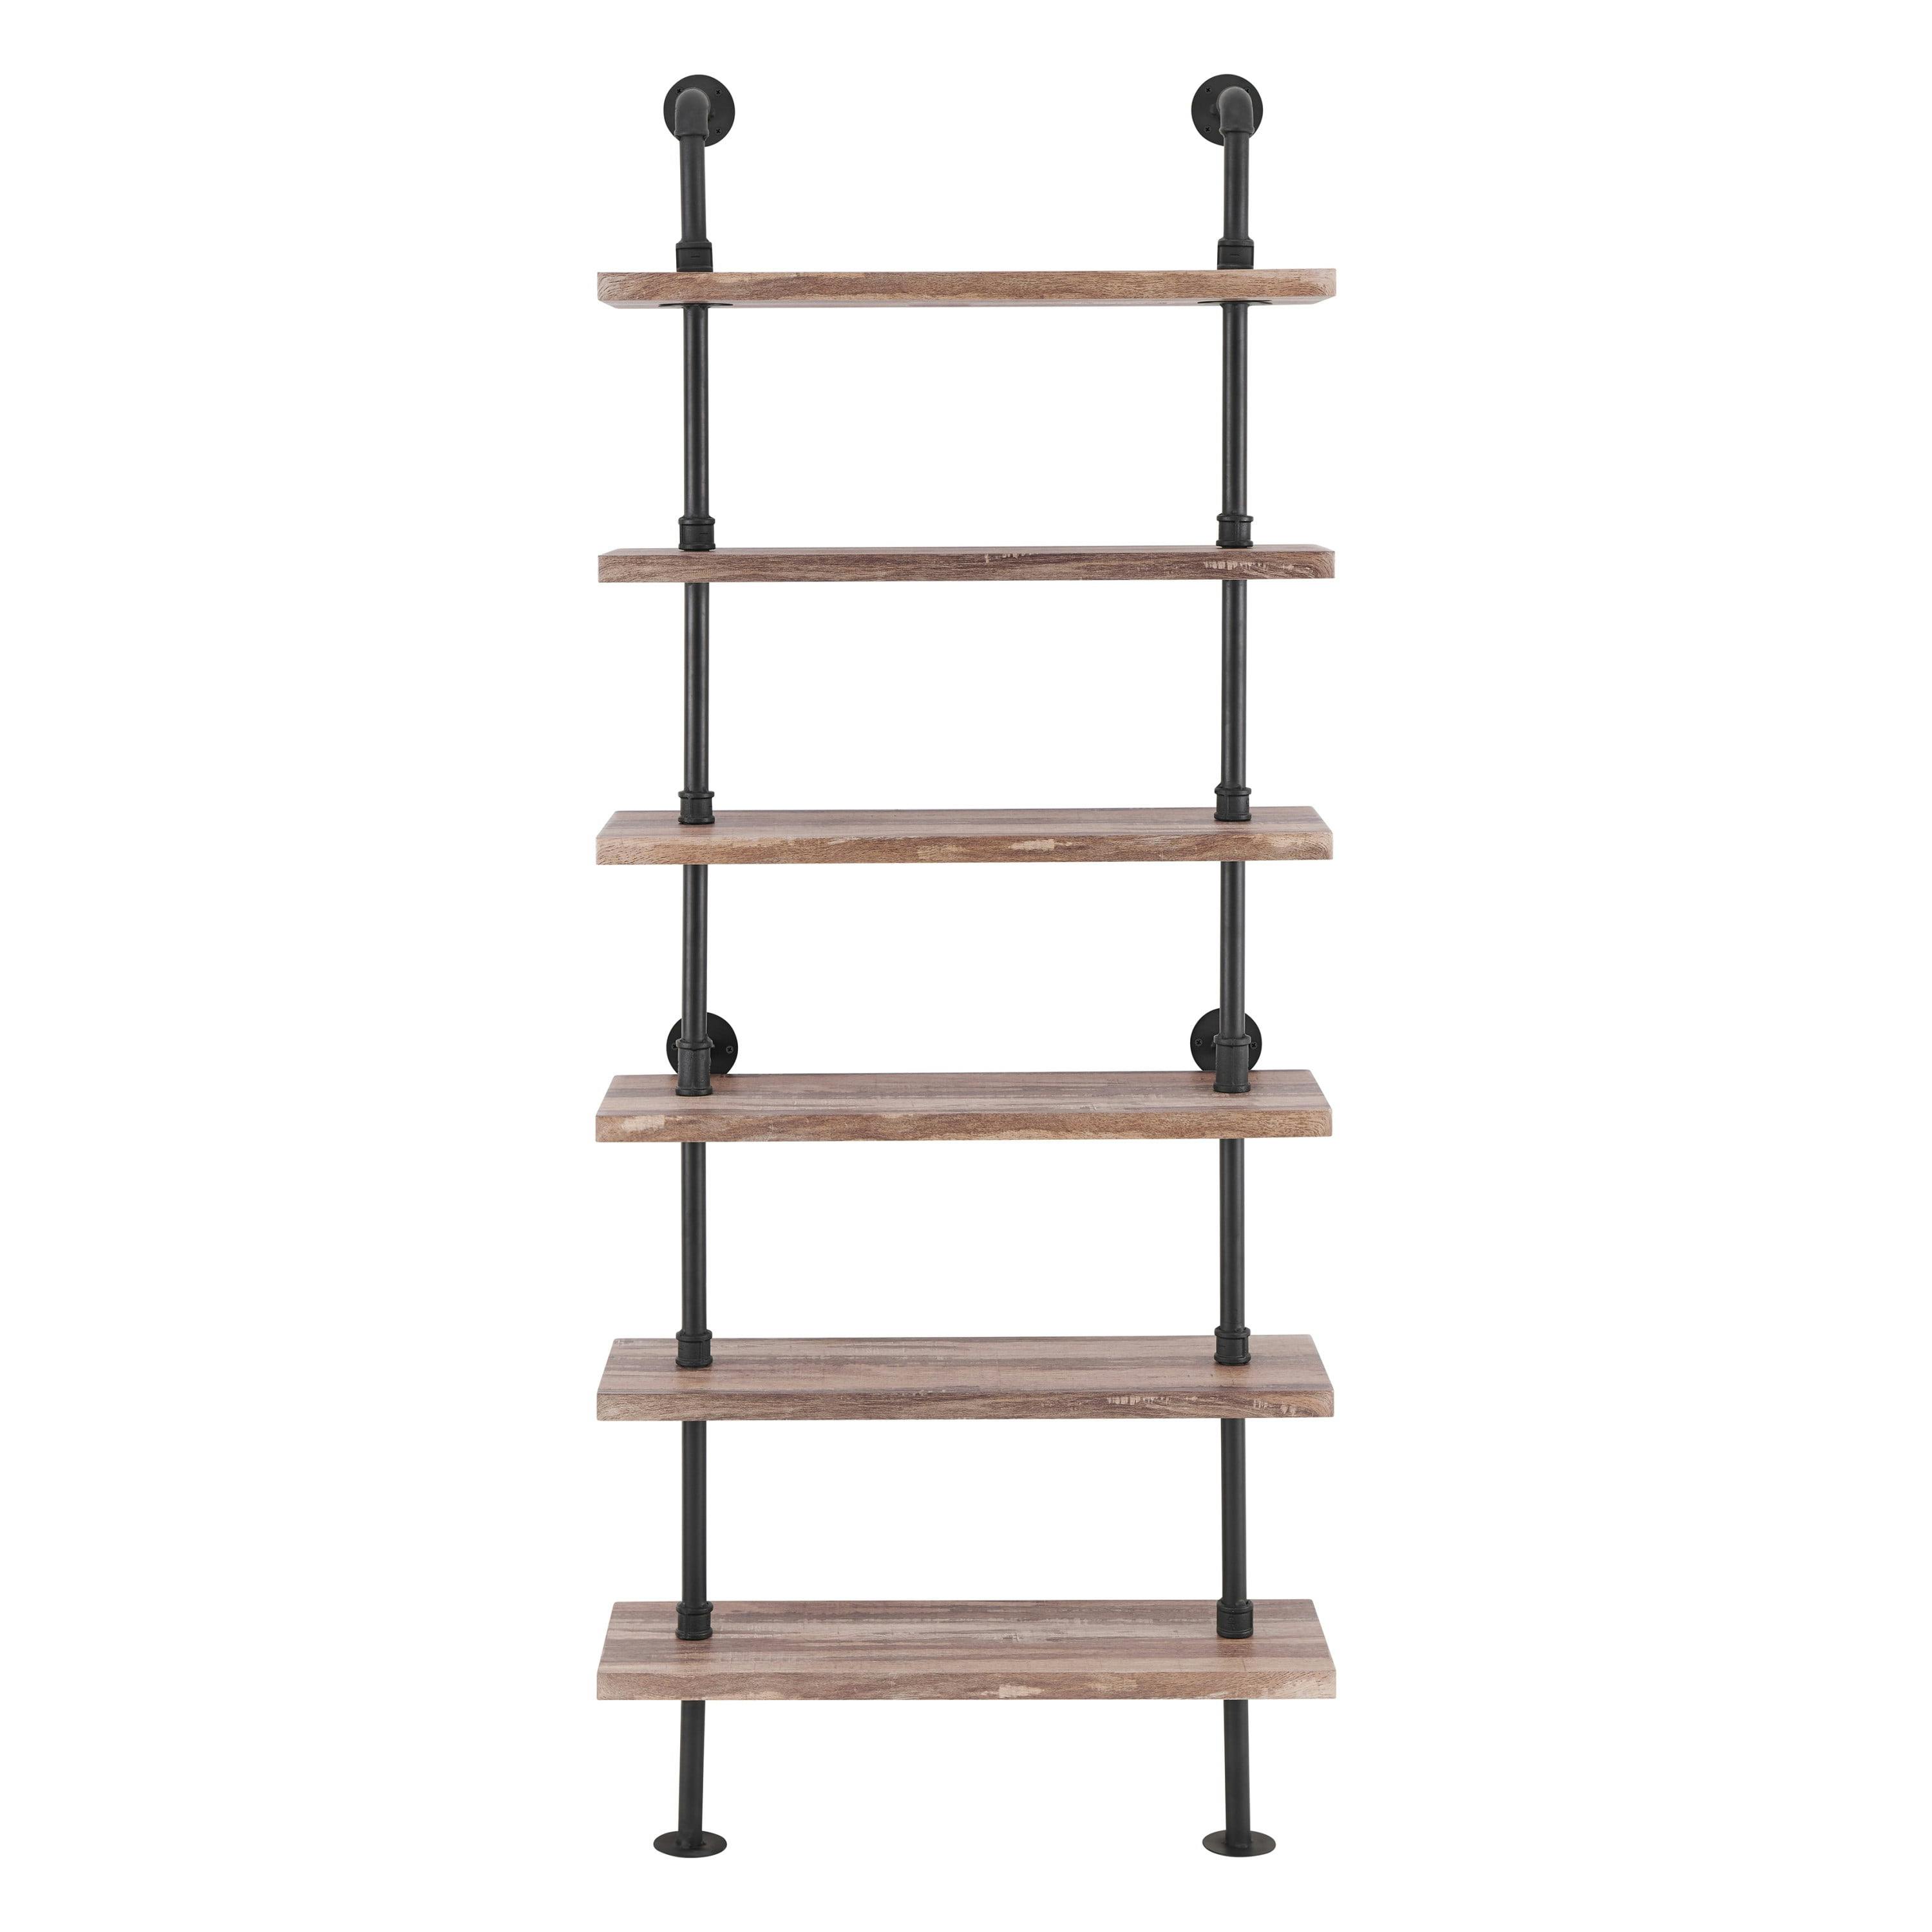 Industrial Black Iron Pipe 6-Tier Wall Mount Ladder Shelf in Distressed Wood